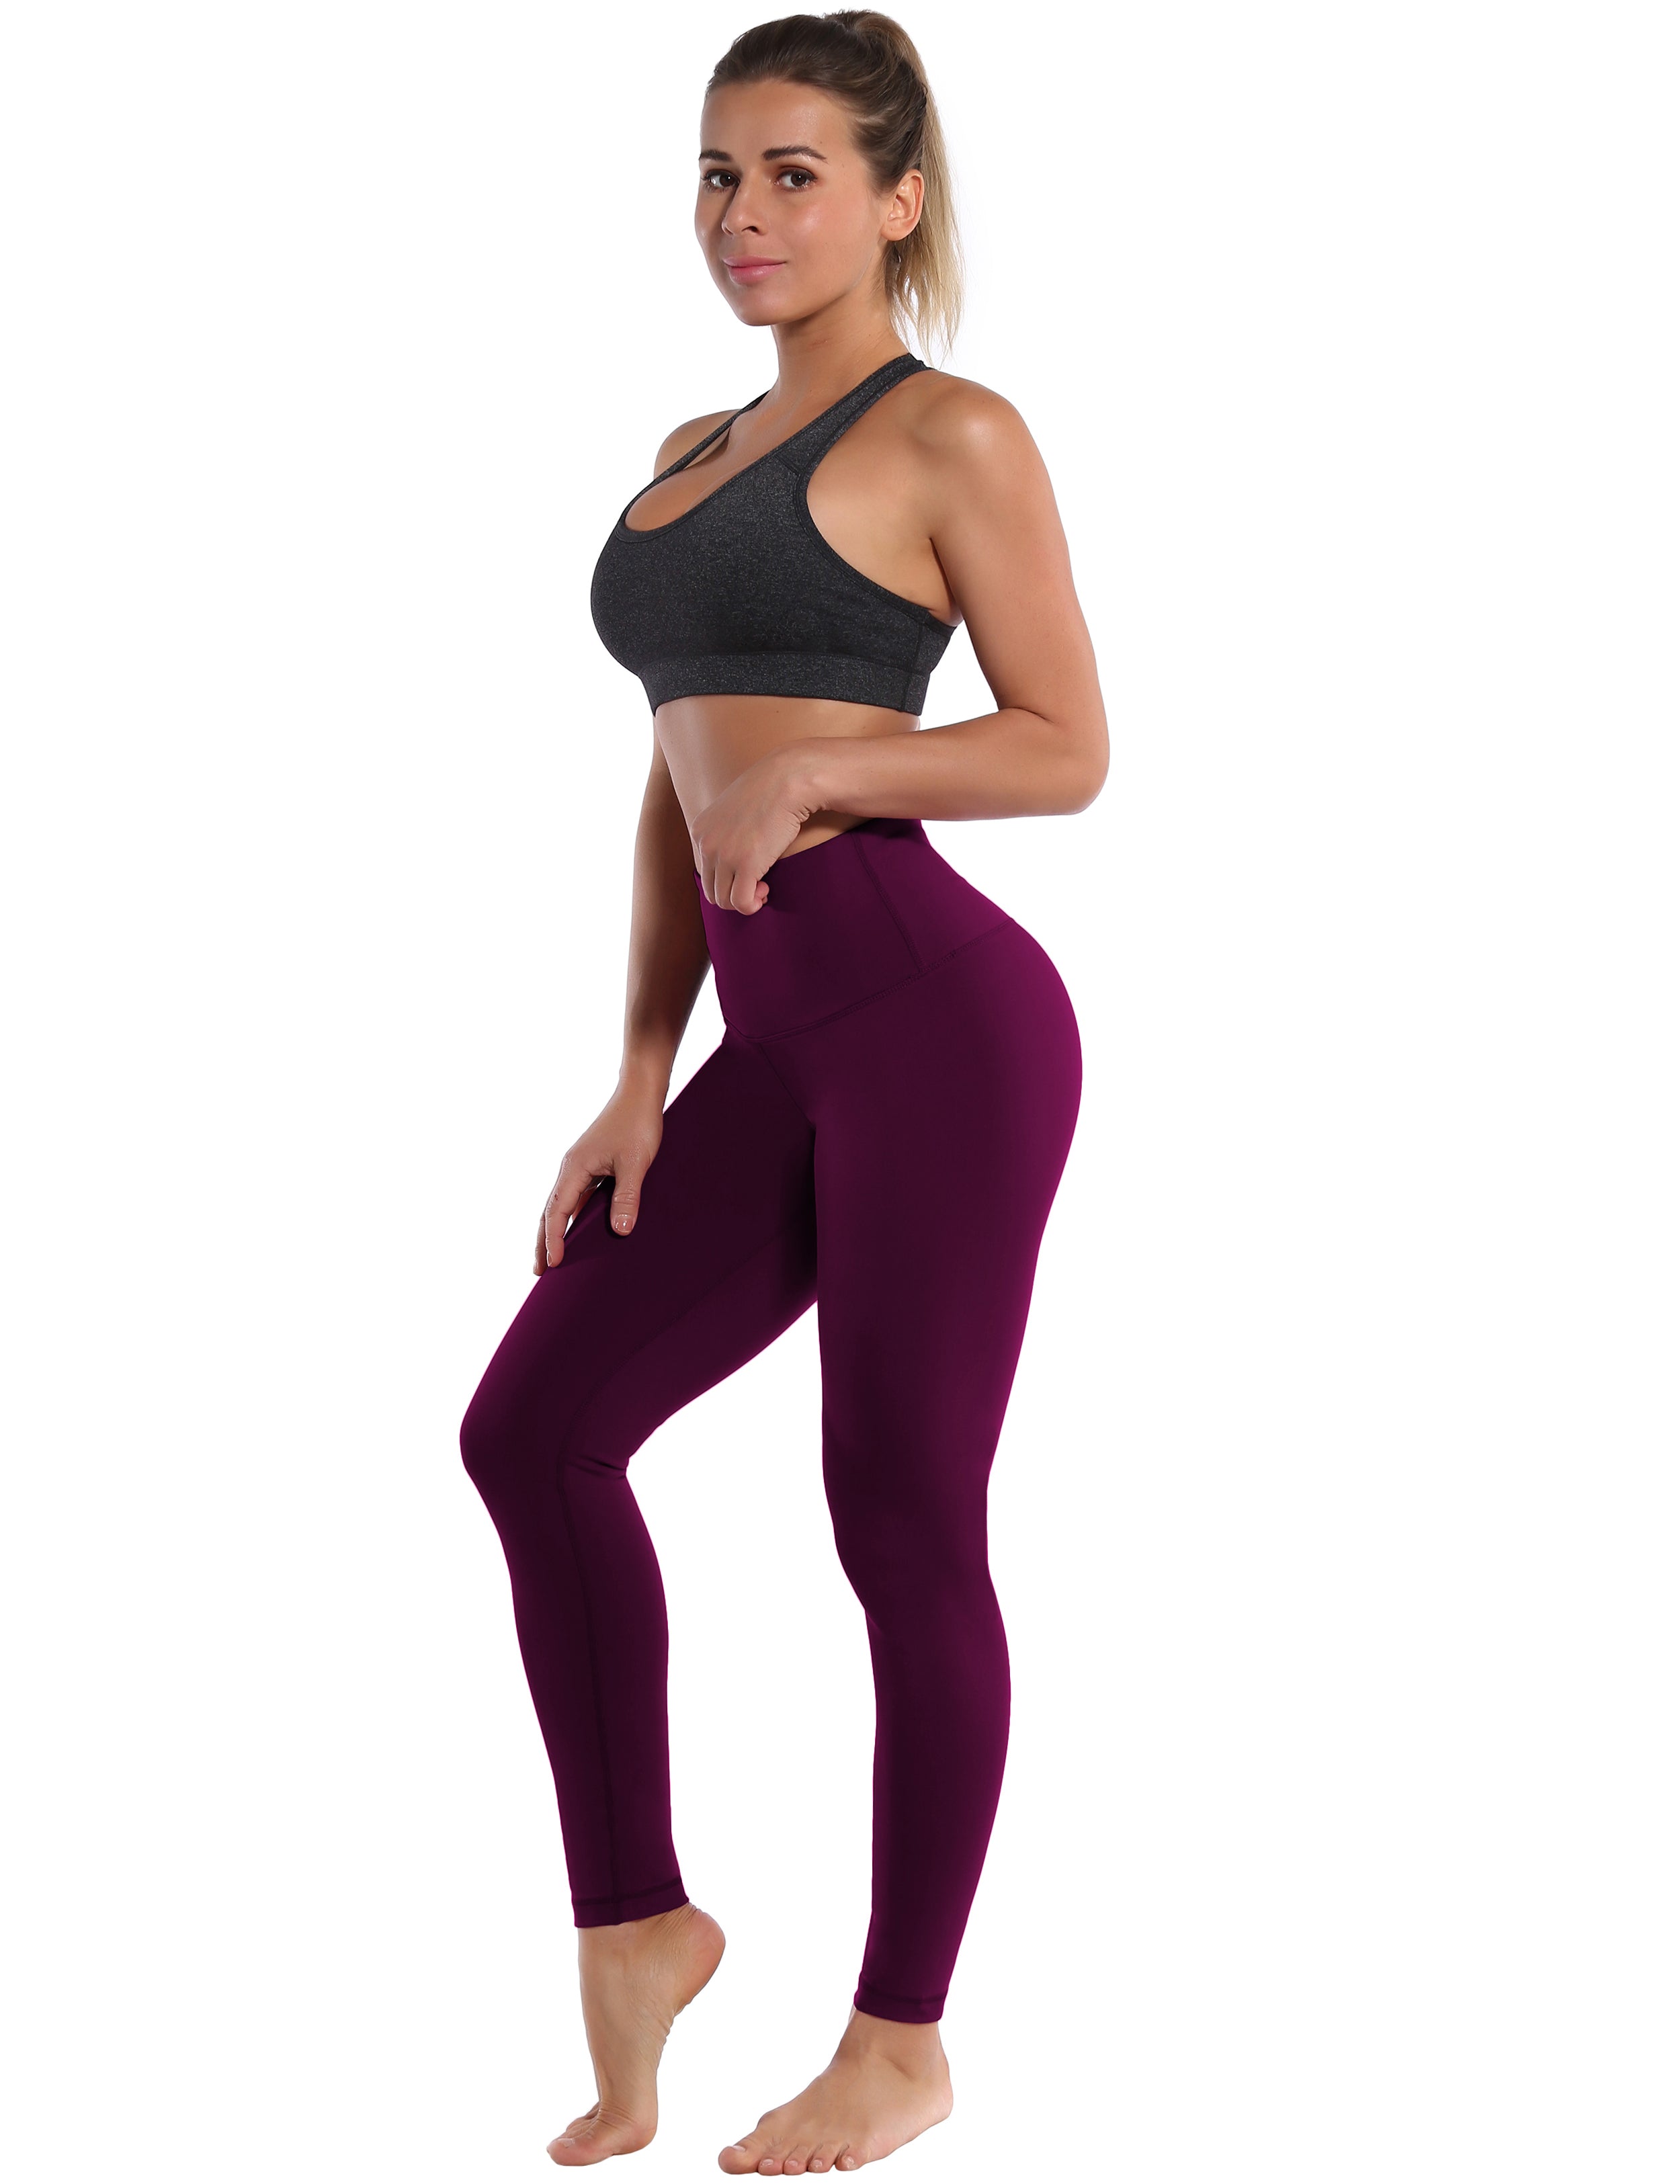 High Waist Golf Pants grapevine 75%Nylon/25%Spandex Fabric doesn't attract lint easily 4-way stretch No see-through Moisture-wicking Tummy control Inner pocket Four lengths